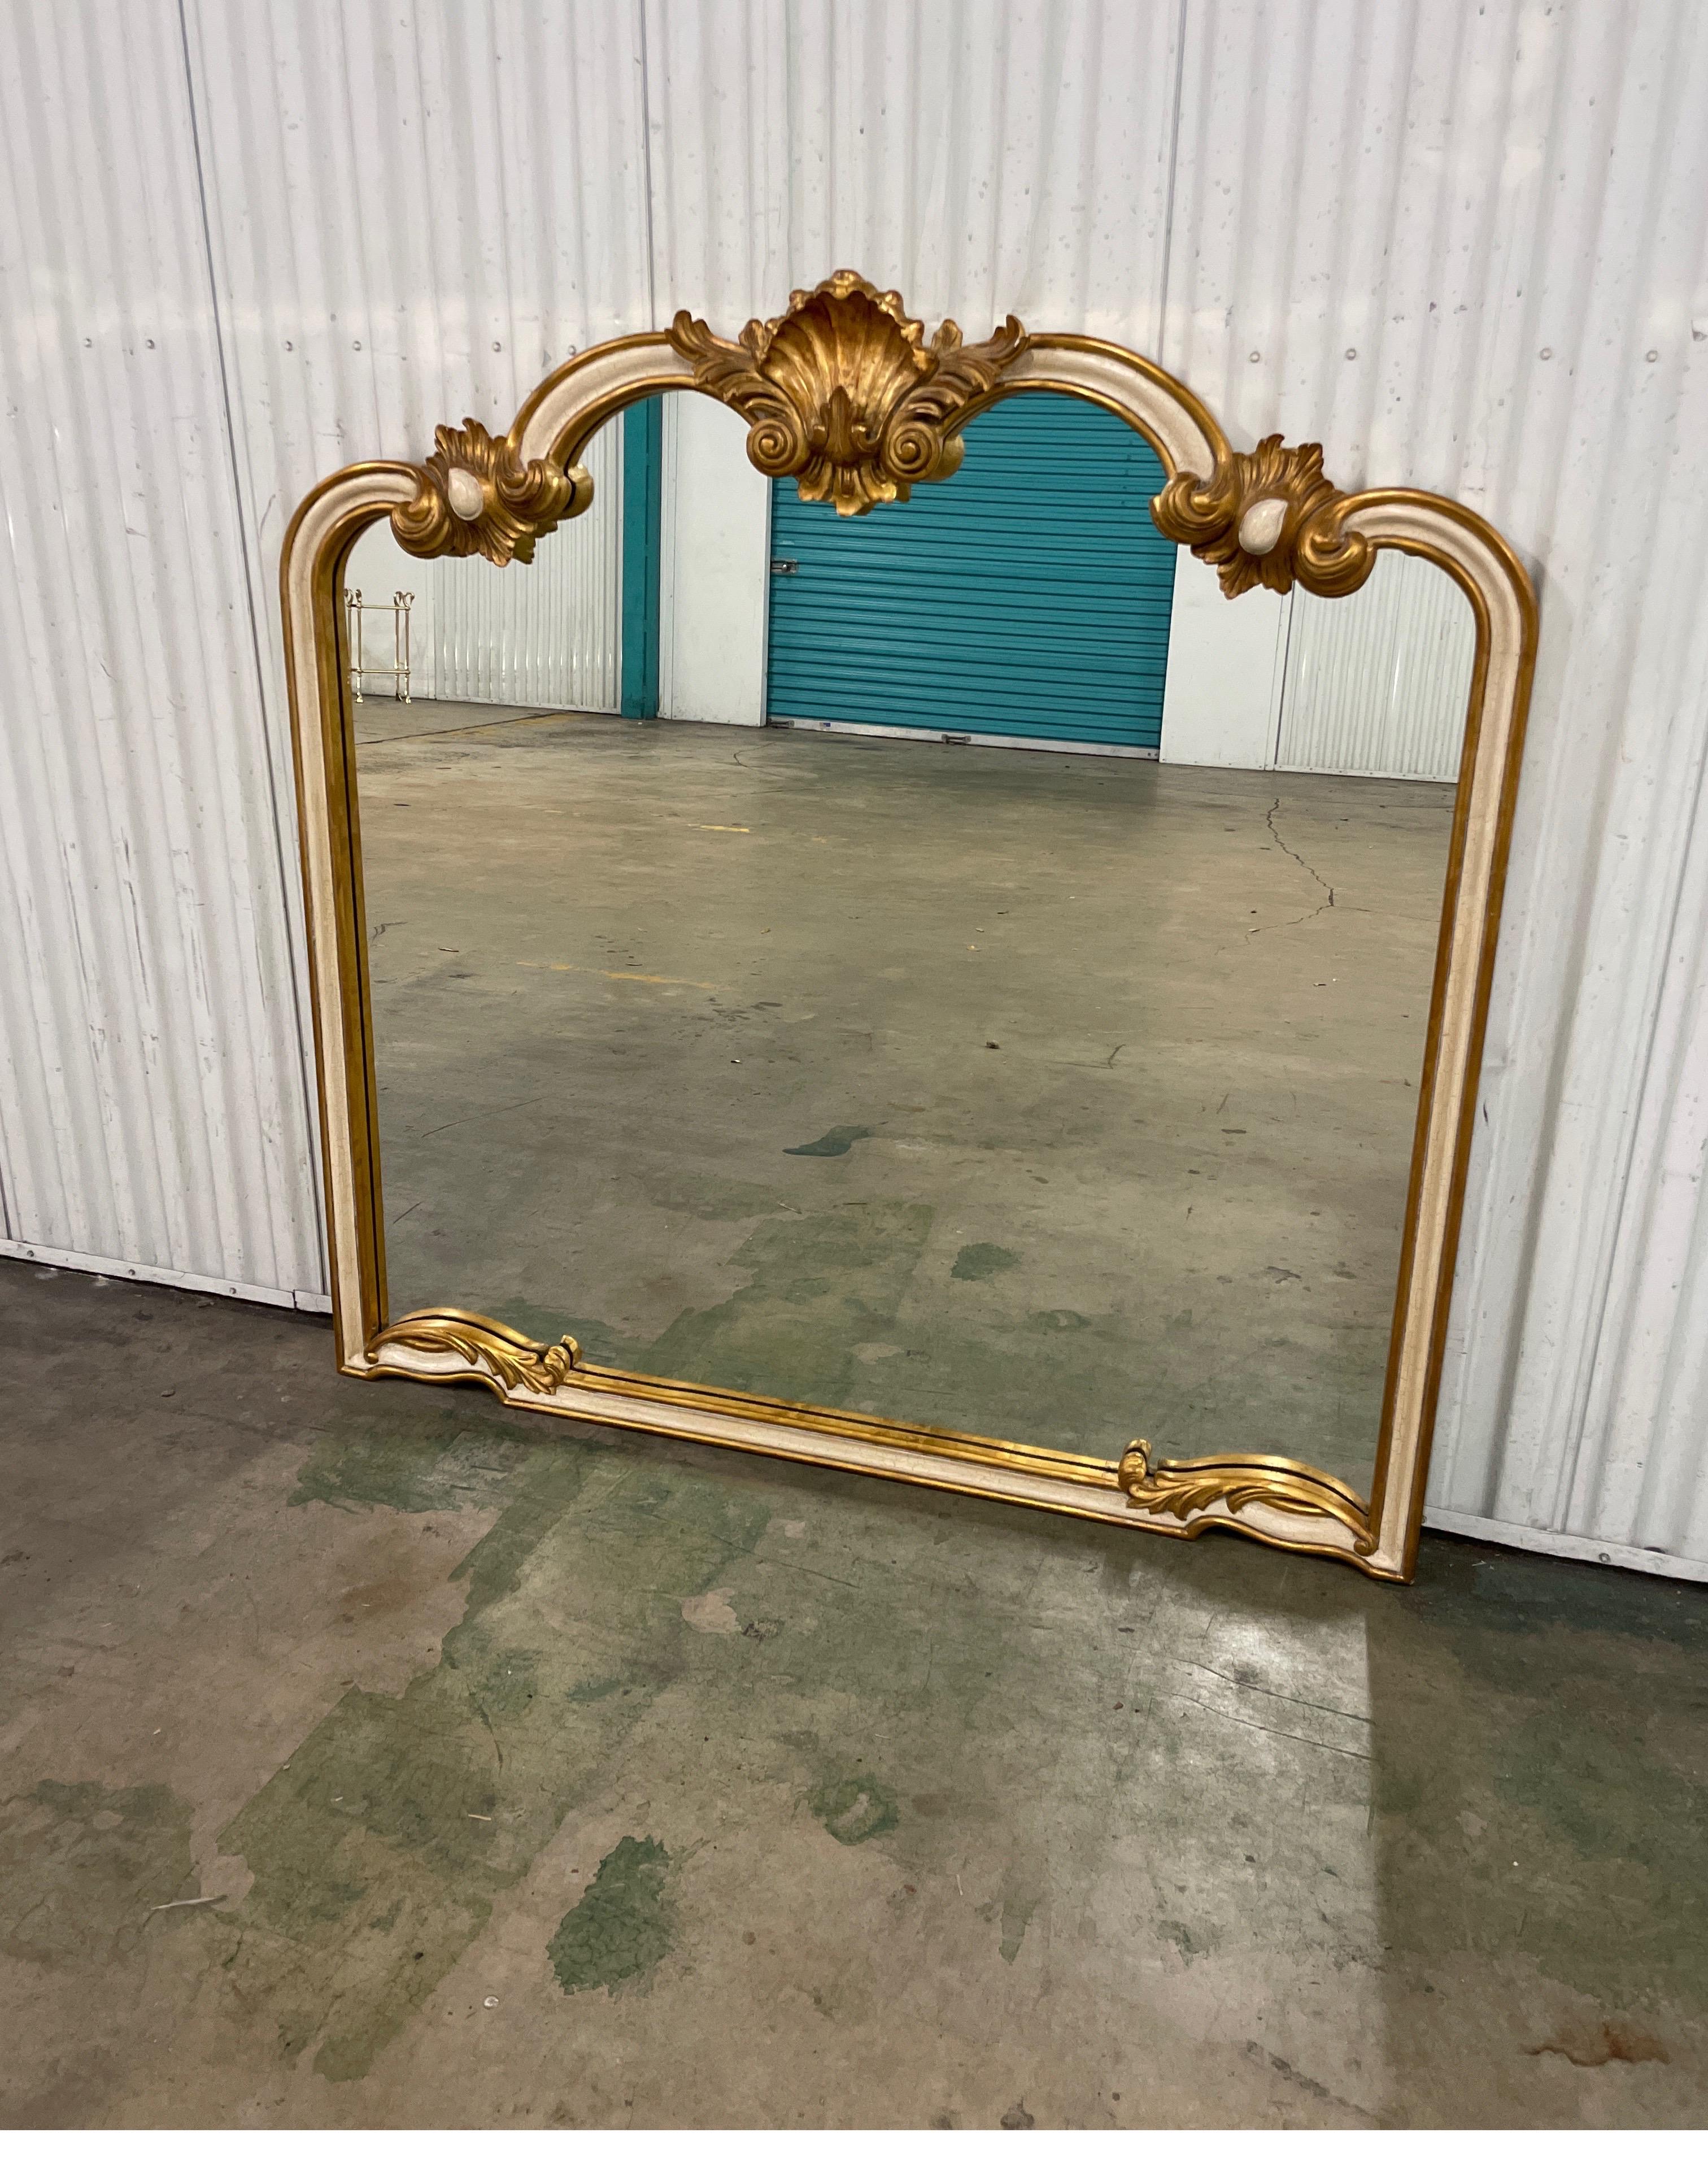 Beautifully carved, gilded and painted mirror by Harrison & Gil. Wonderful carved details with a large shell at the top. This mirror will be a standout wherever you place it. Will work great over a fireplace, dining room buffet, console or a sofa.